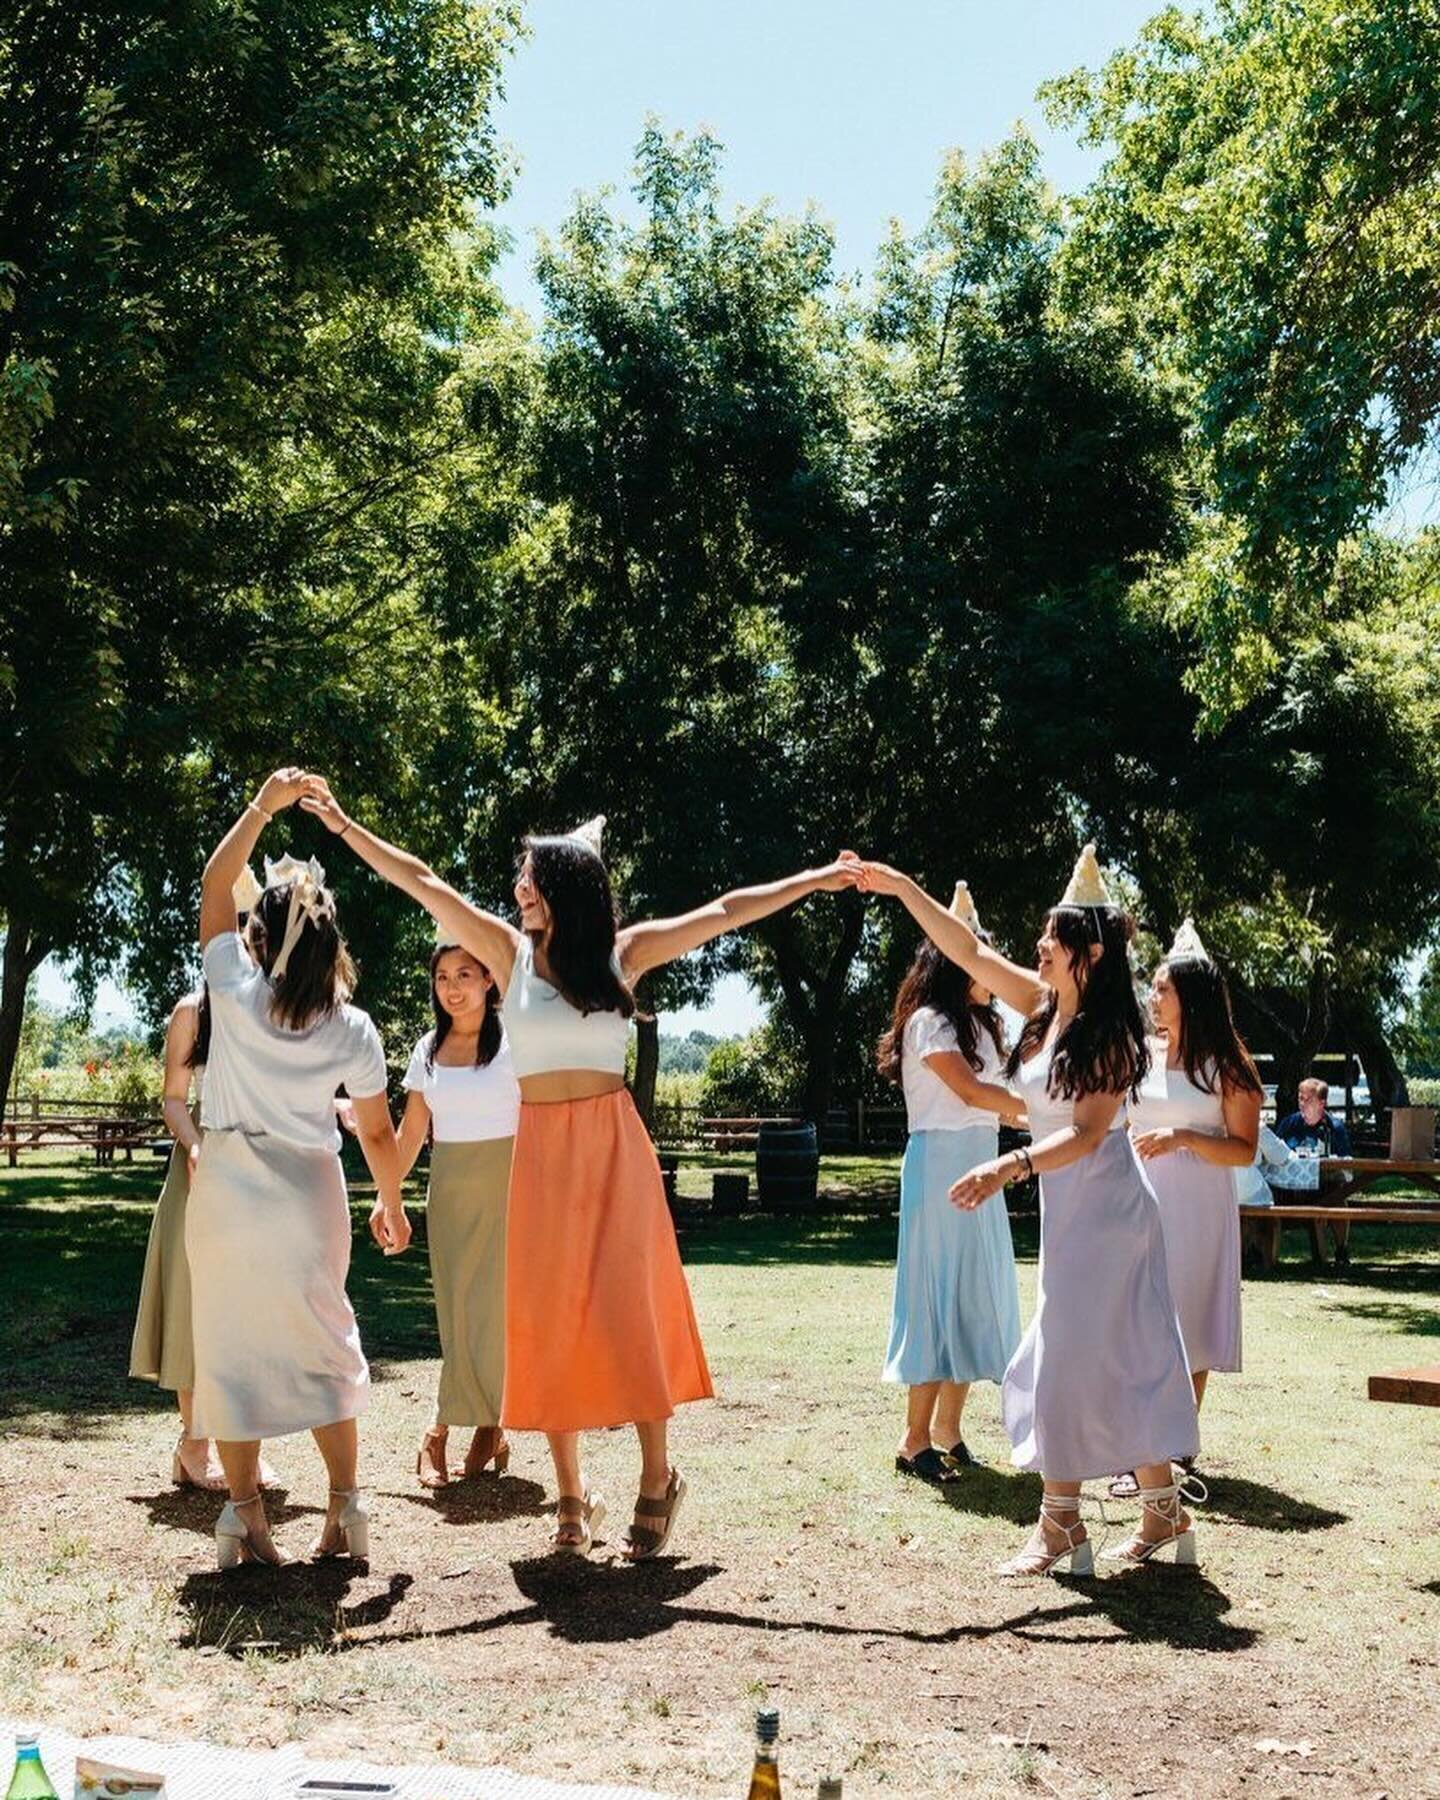 Dying to do more frienship shoots. Here, a sweetie bachelorette last summer in Napa 

#bachelorettephotoshoot #bacheloretteweekend #bachelorettepartyideas #friendshipphotography